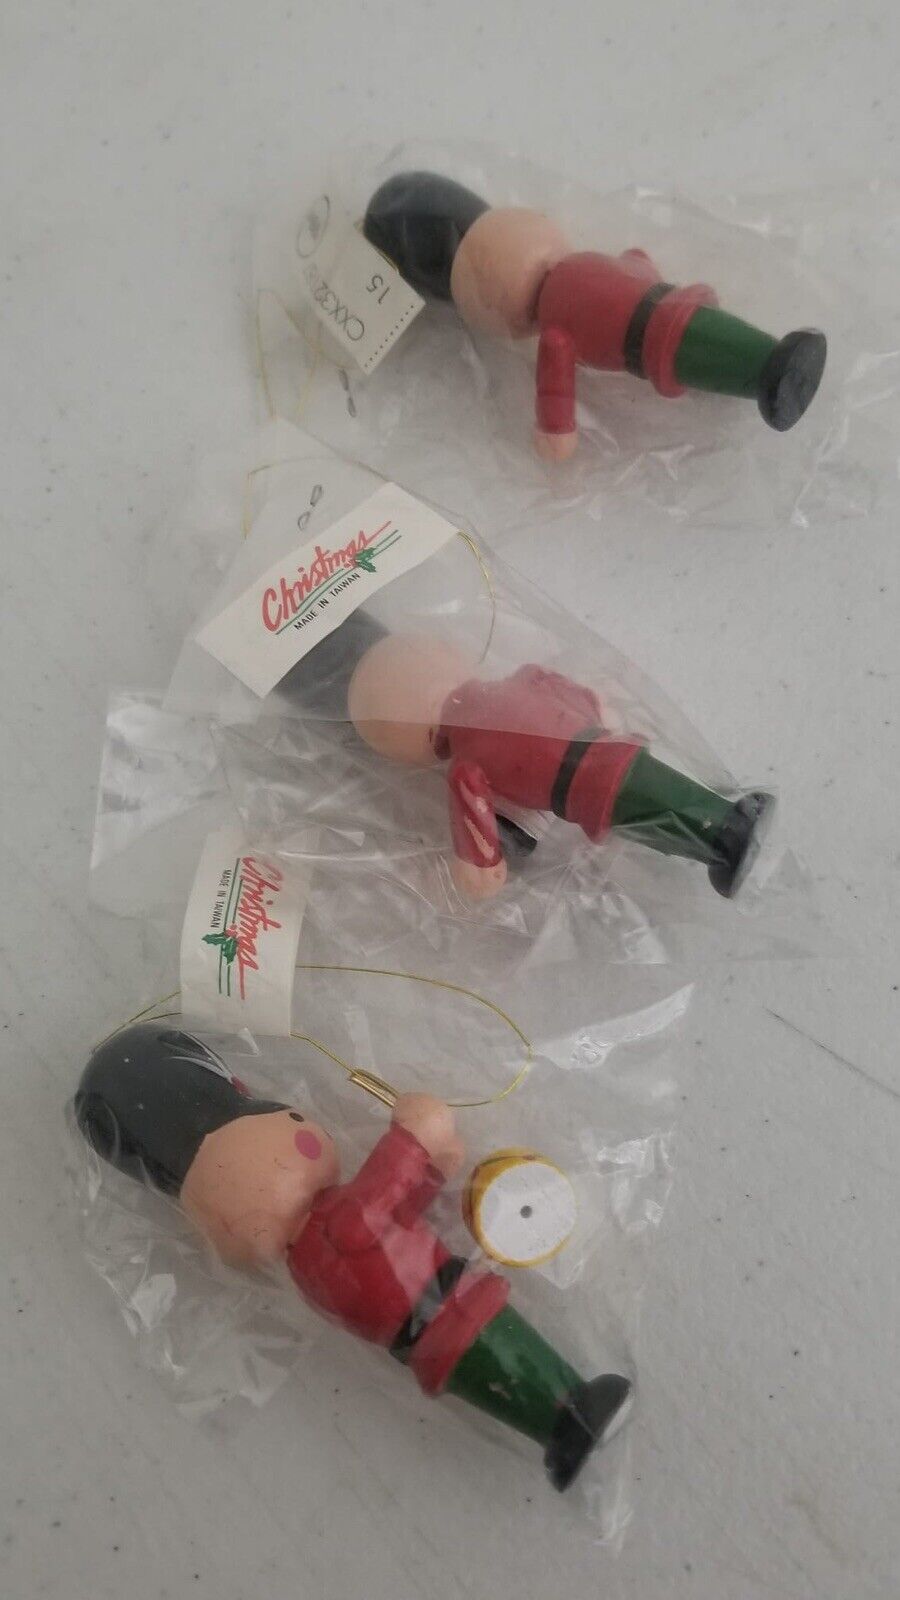 Vintage Hand-Painted Nutcracker Soldier Christmas Ornaments - Collectible Set of 3 from Taiwan - TreasuTiques